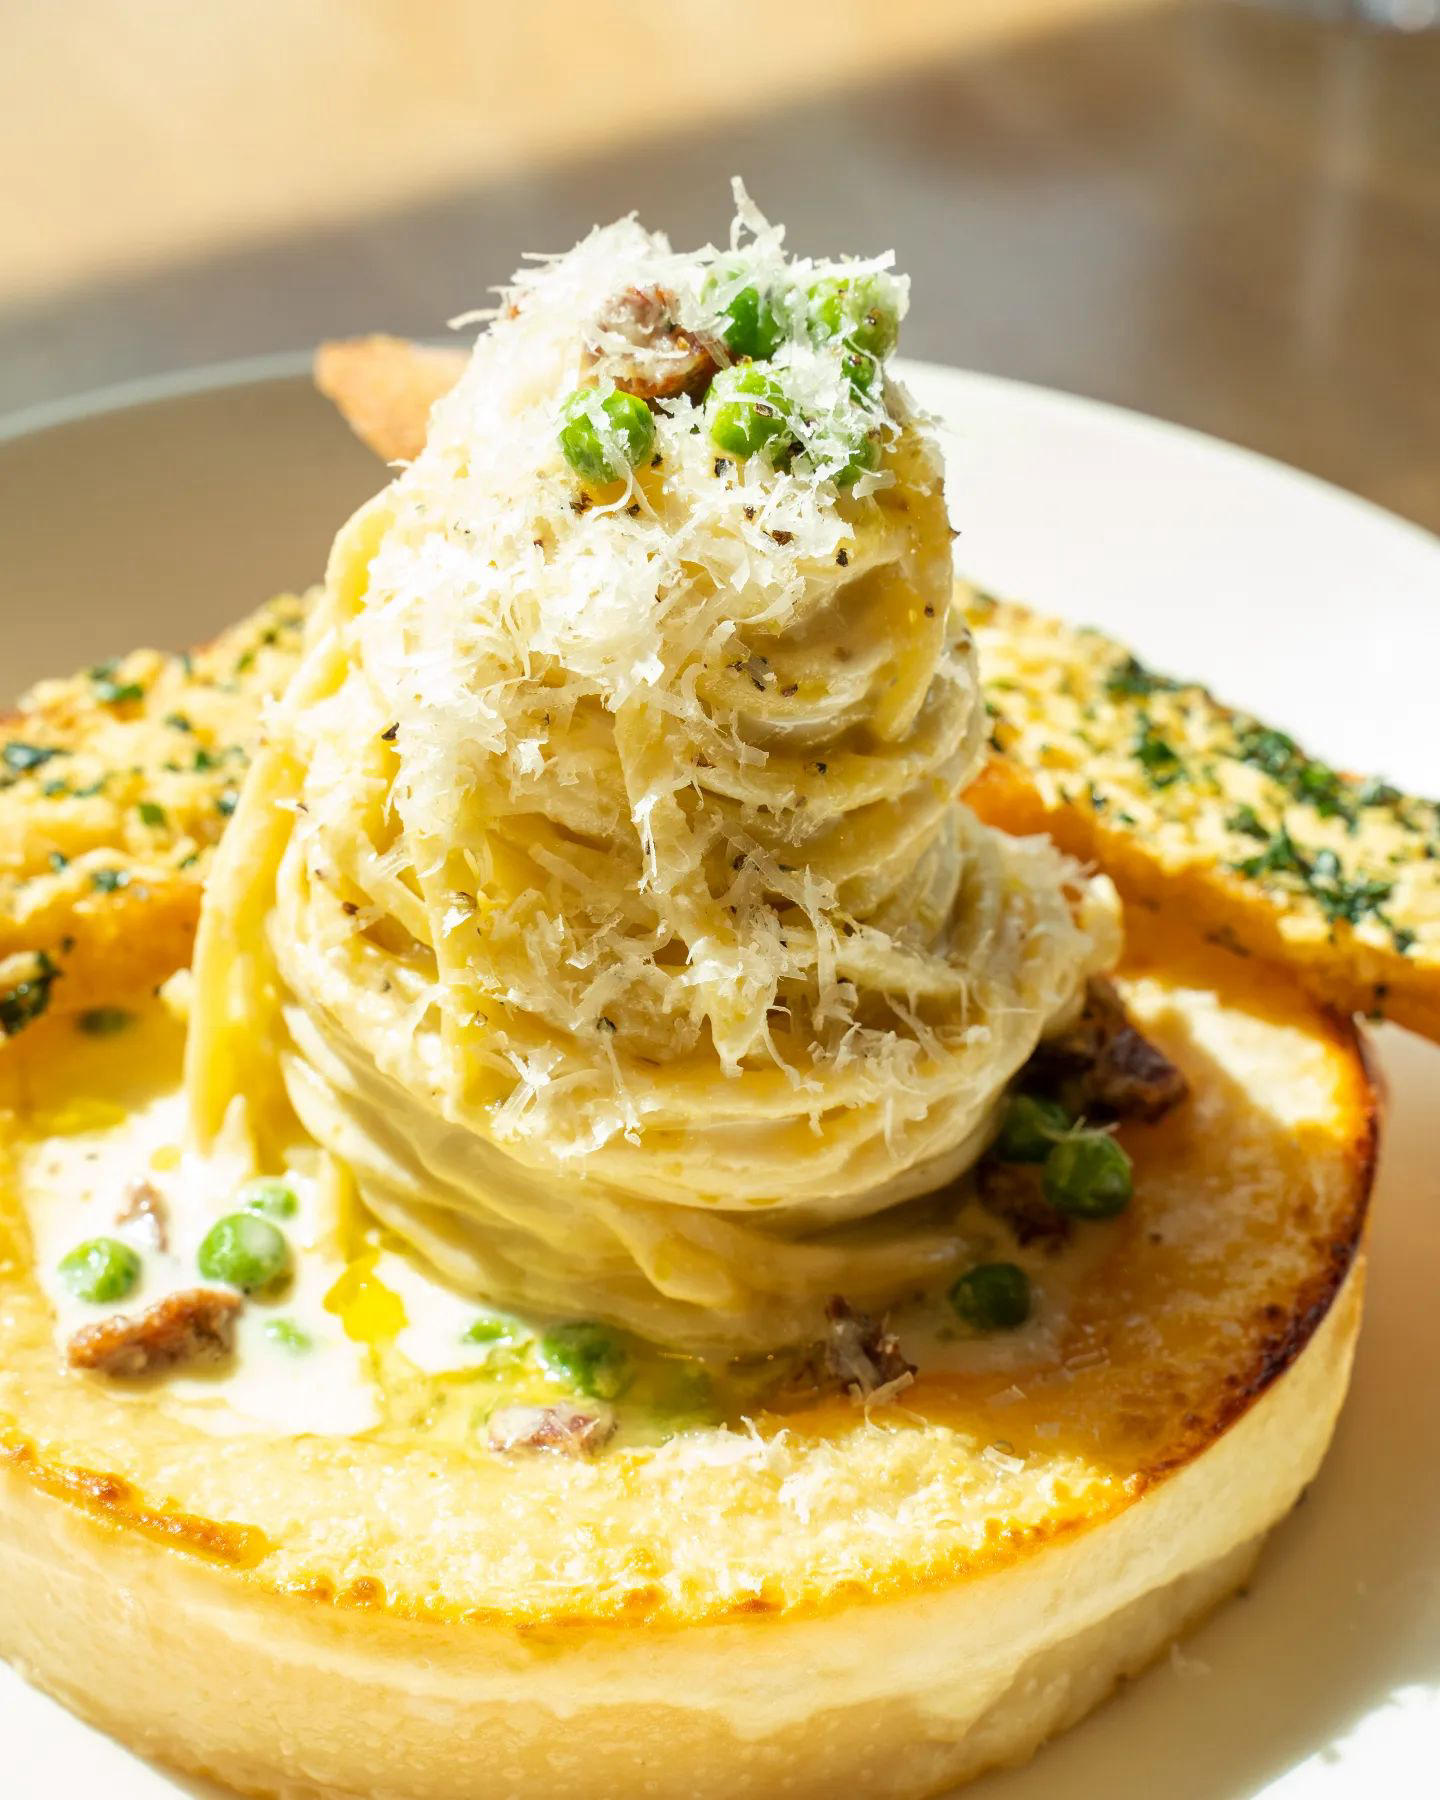 image  1 GiadaVegas - This new menu item is a showstopper